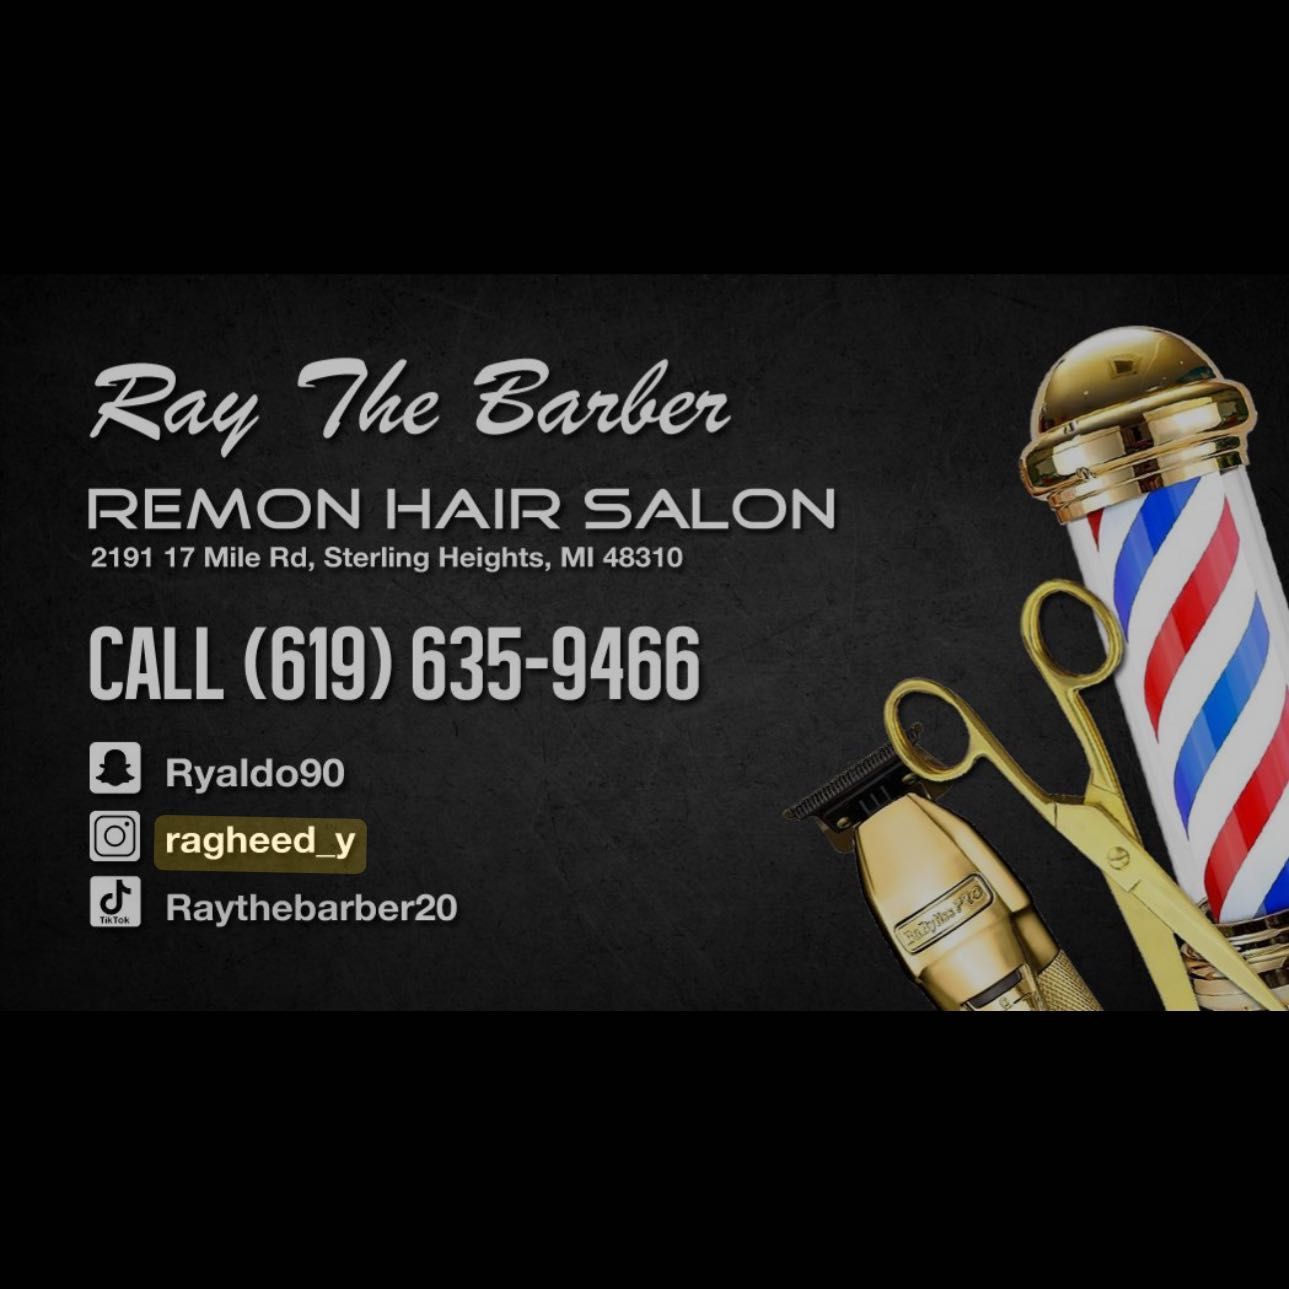 Ray the barber, 2191 17 Mile Rd, Sterling Heights, 48310